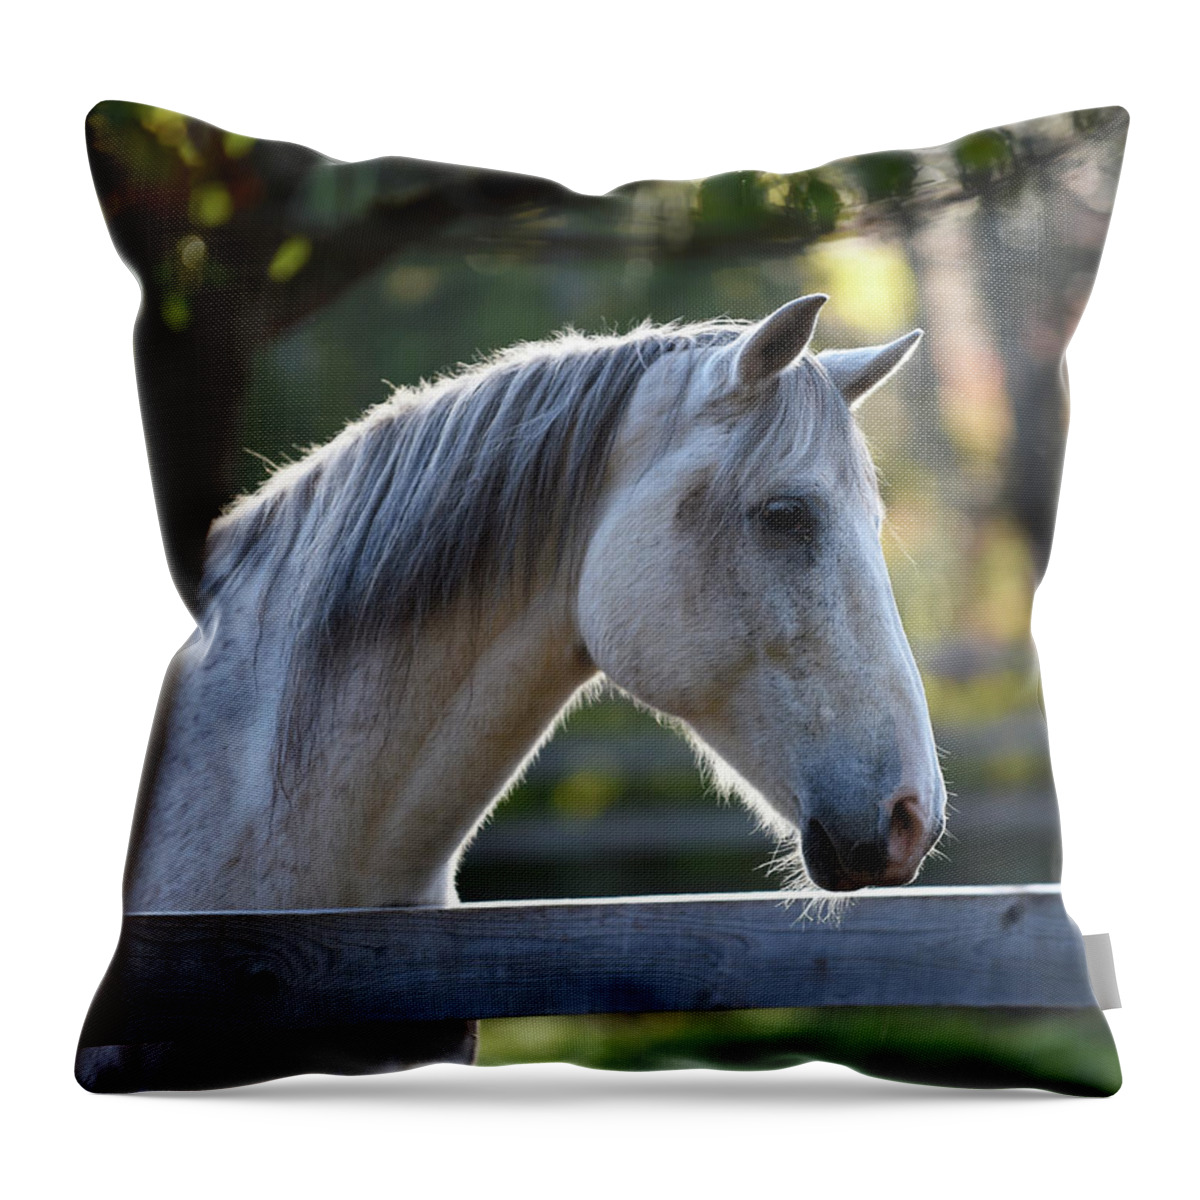 Rosemary Farm Throw Pillow featuring the photograph Christian by Carien Schippers